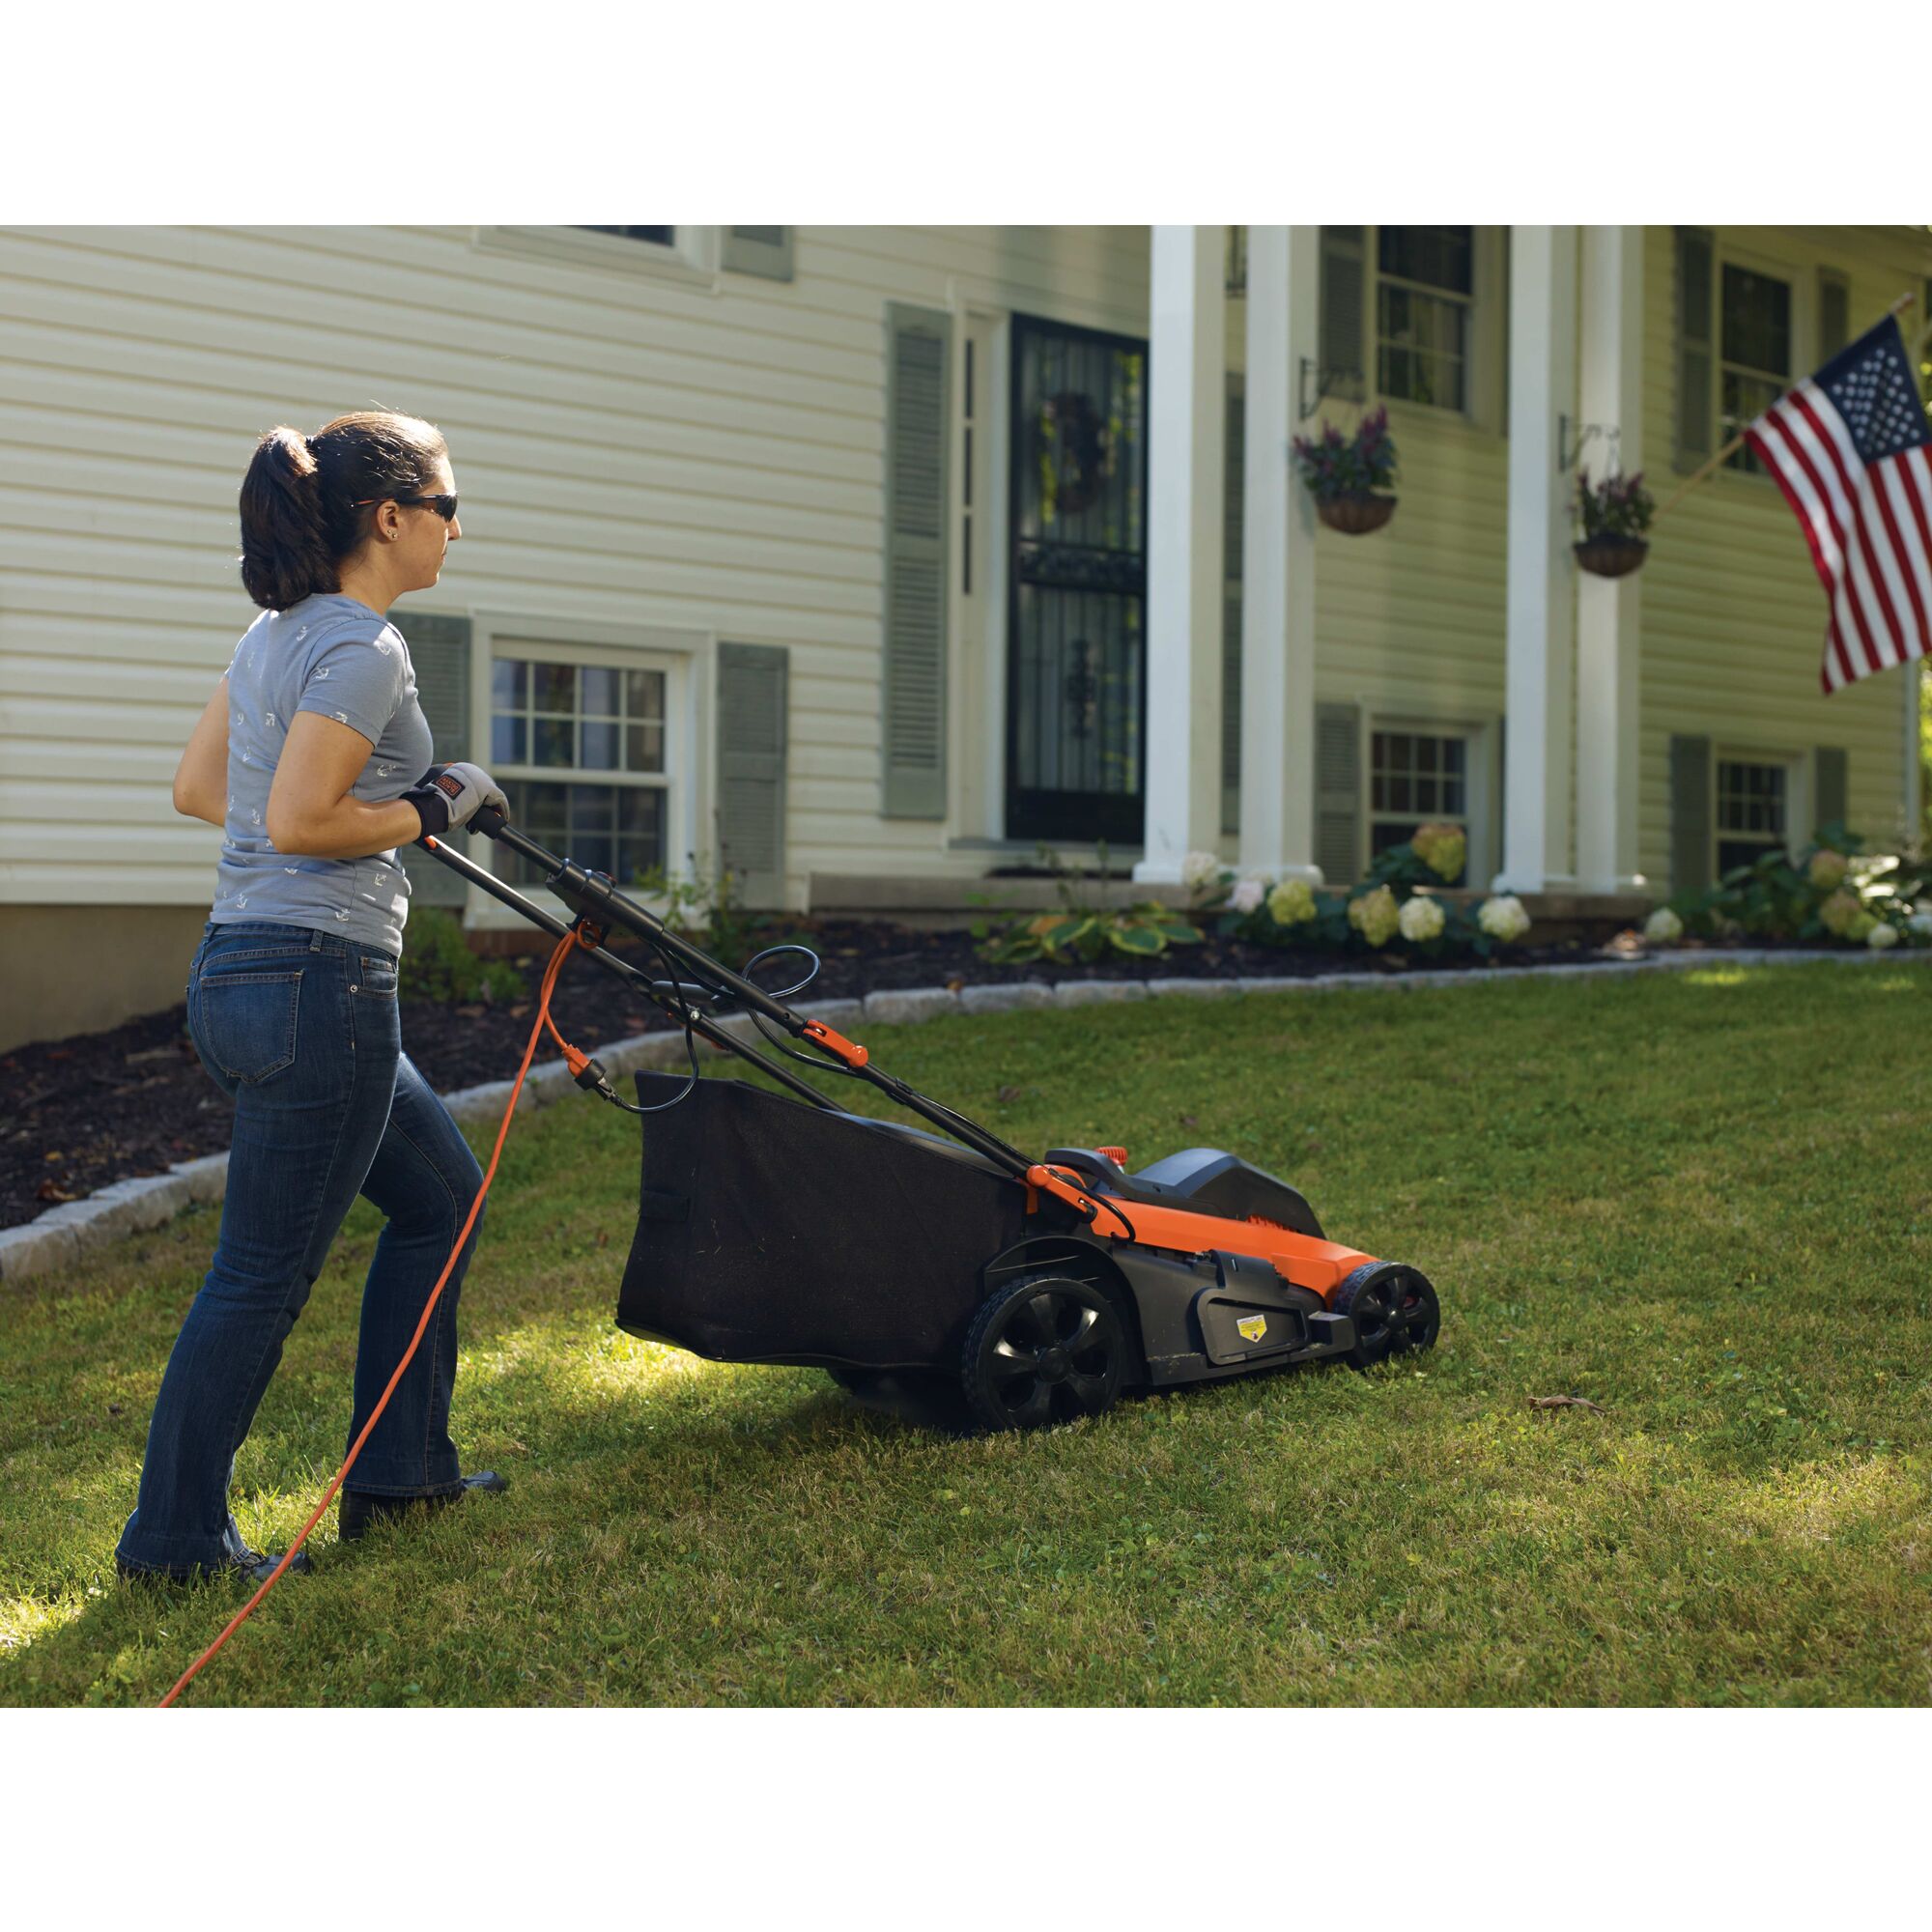 Woman pushing Corded Lawn Mower up a hill.